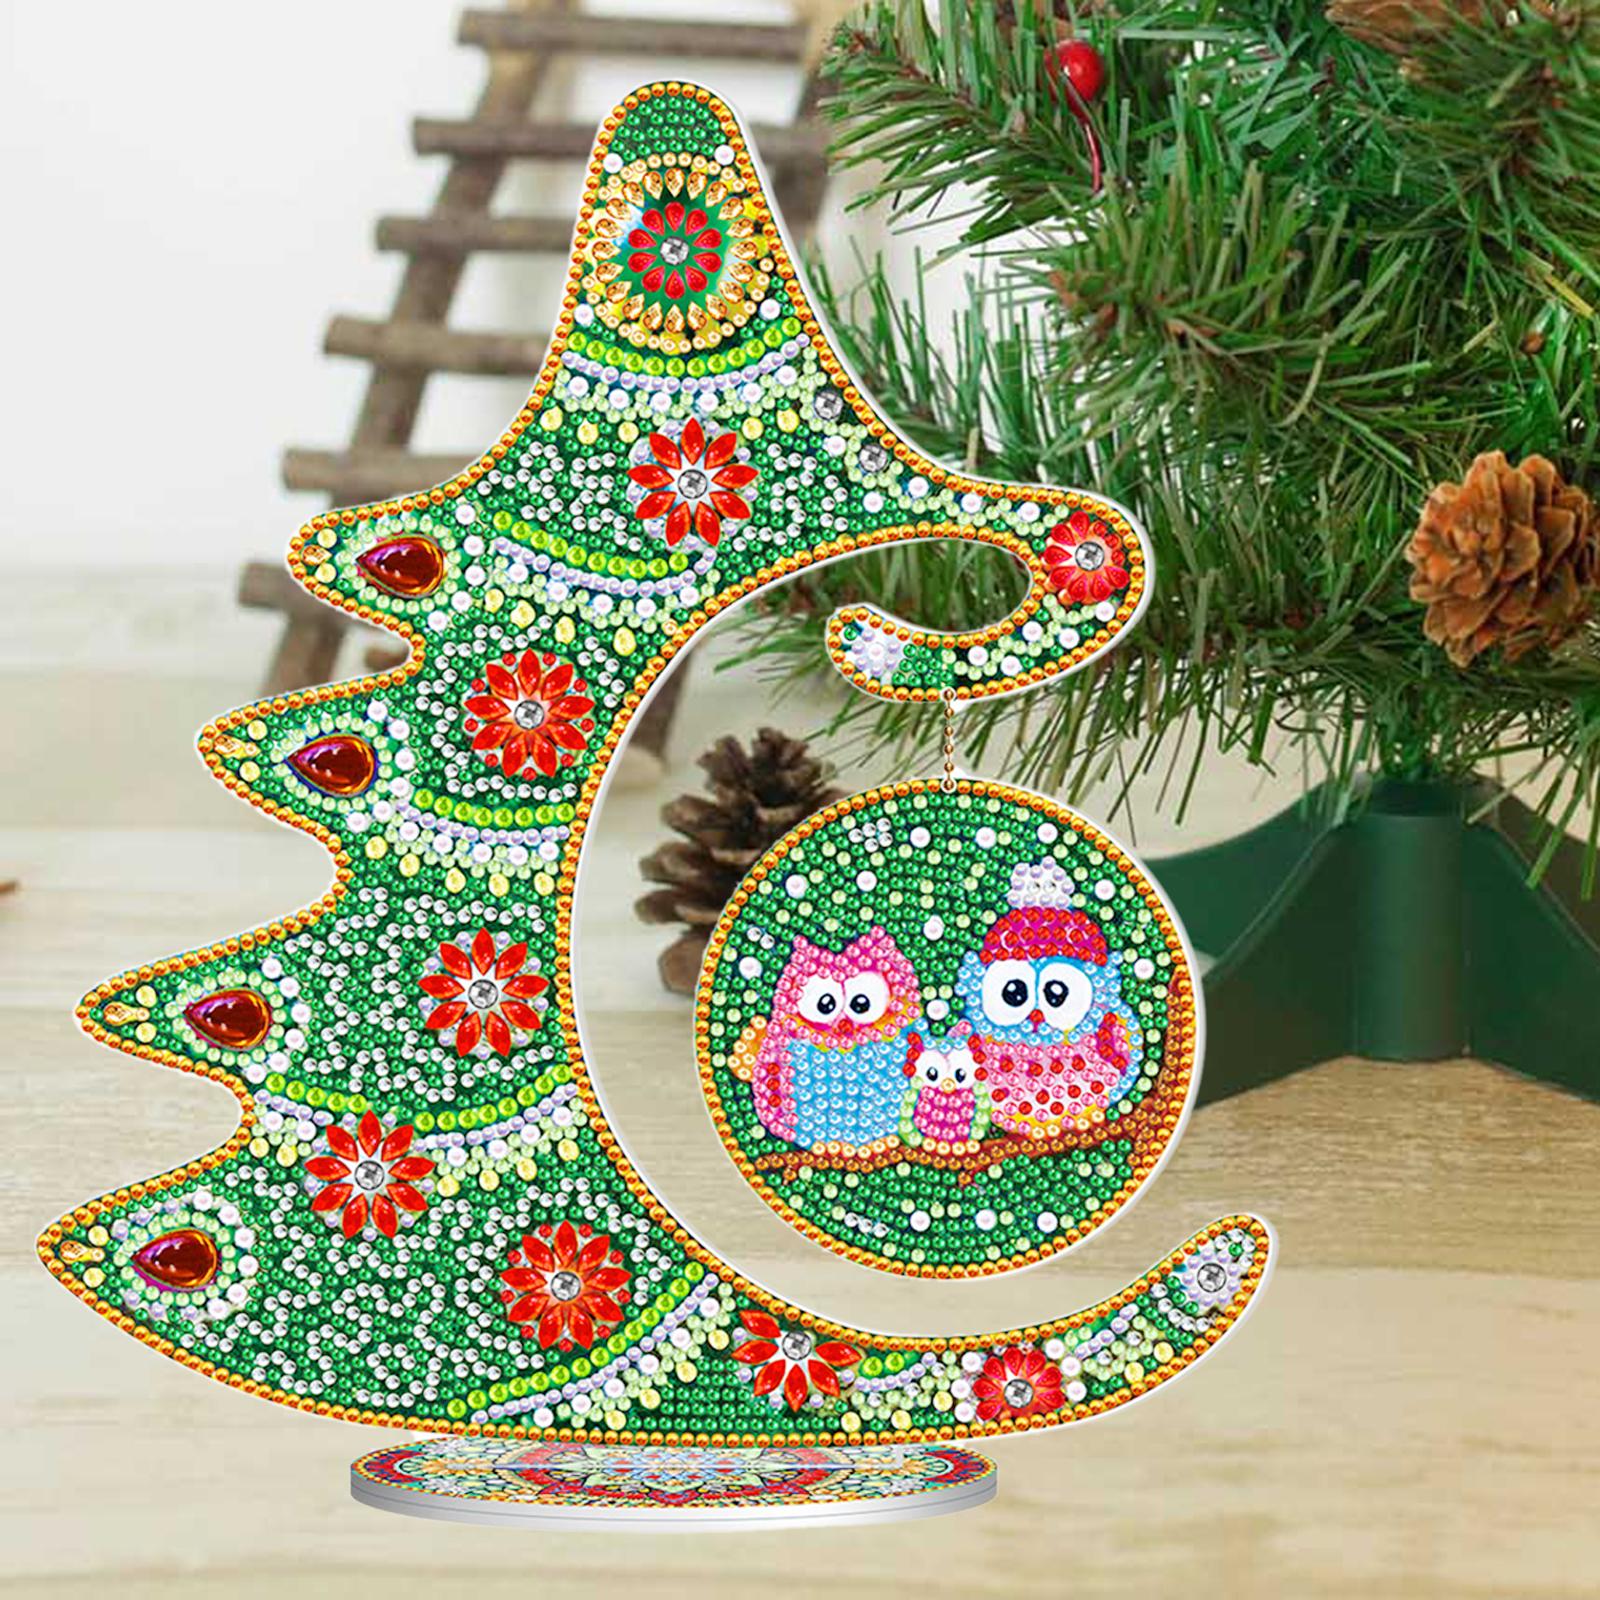 Diamond Painting Christmas Tree Craft 5D DIY Kit Ornament Gifts for New Year Green 25x28.5cm